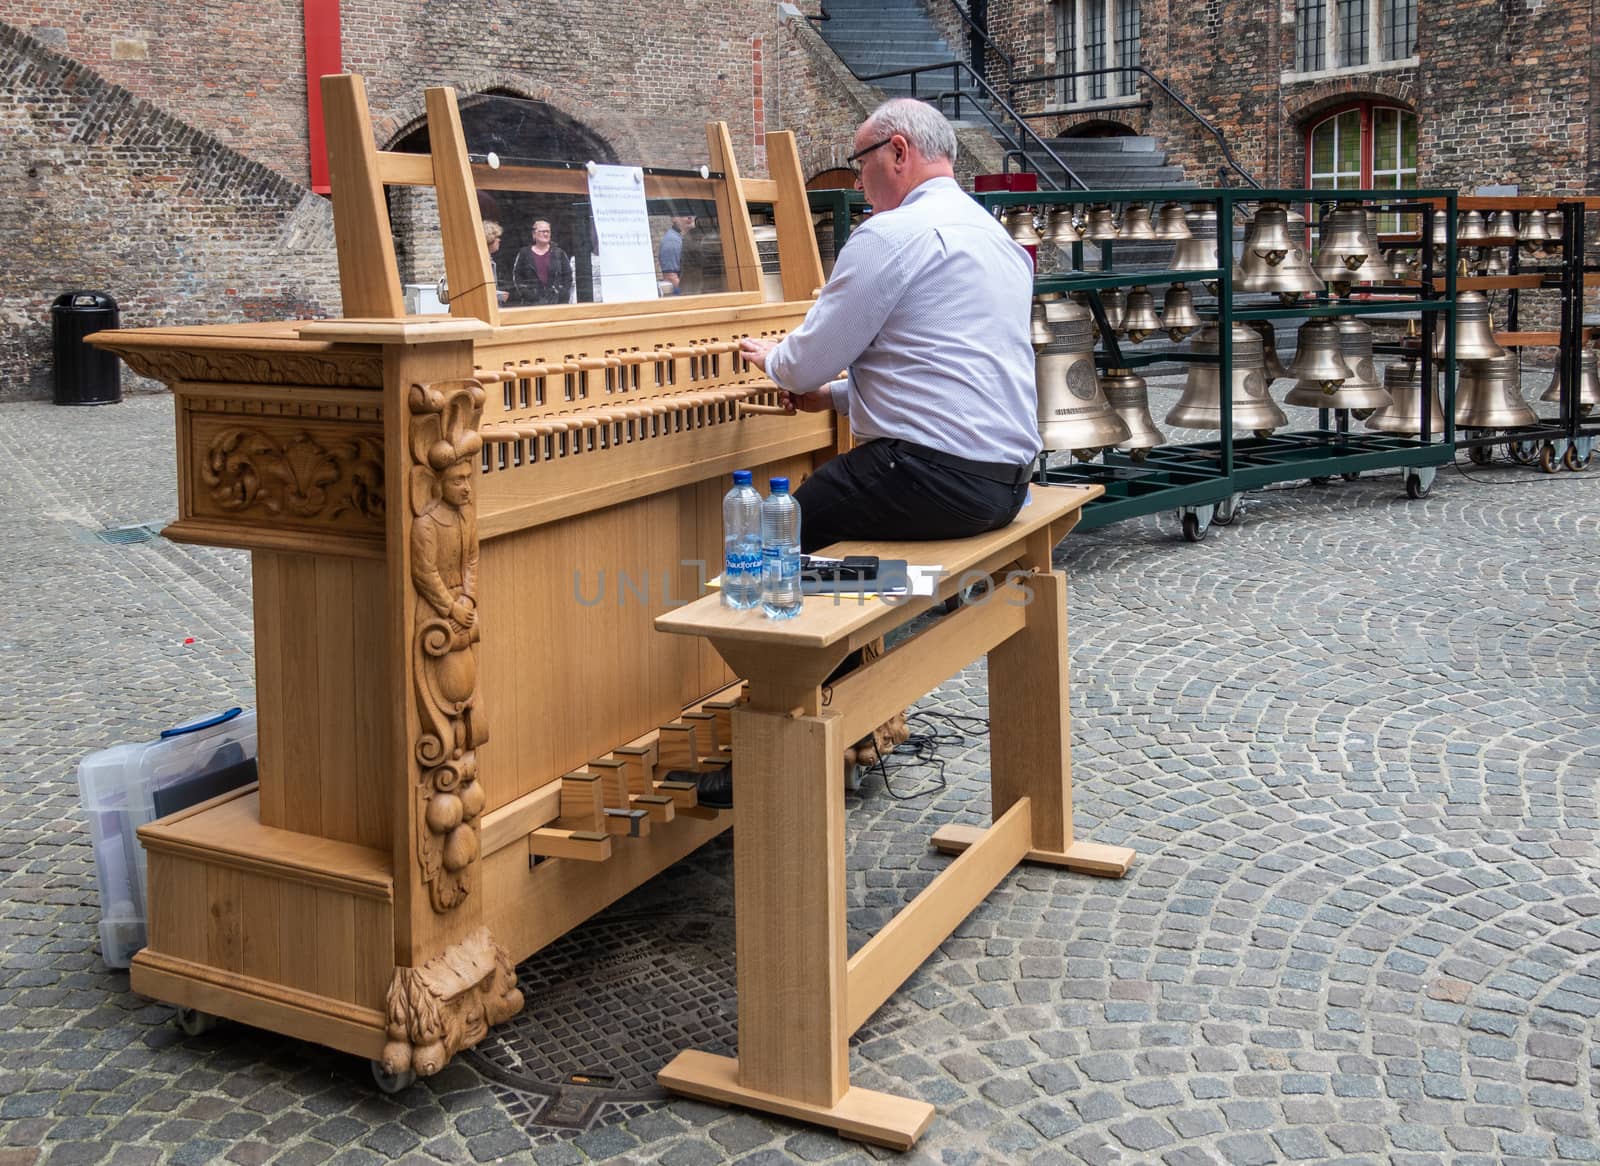 Musician plays the carillon in Bruges, Flanders, Belgium. by Claudine